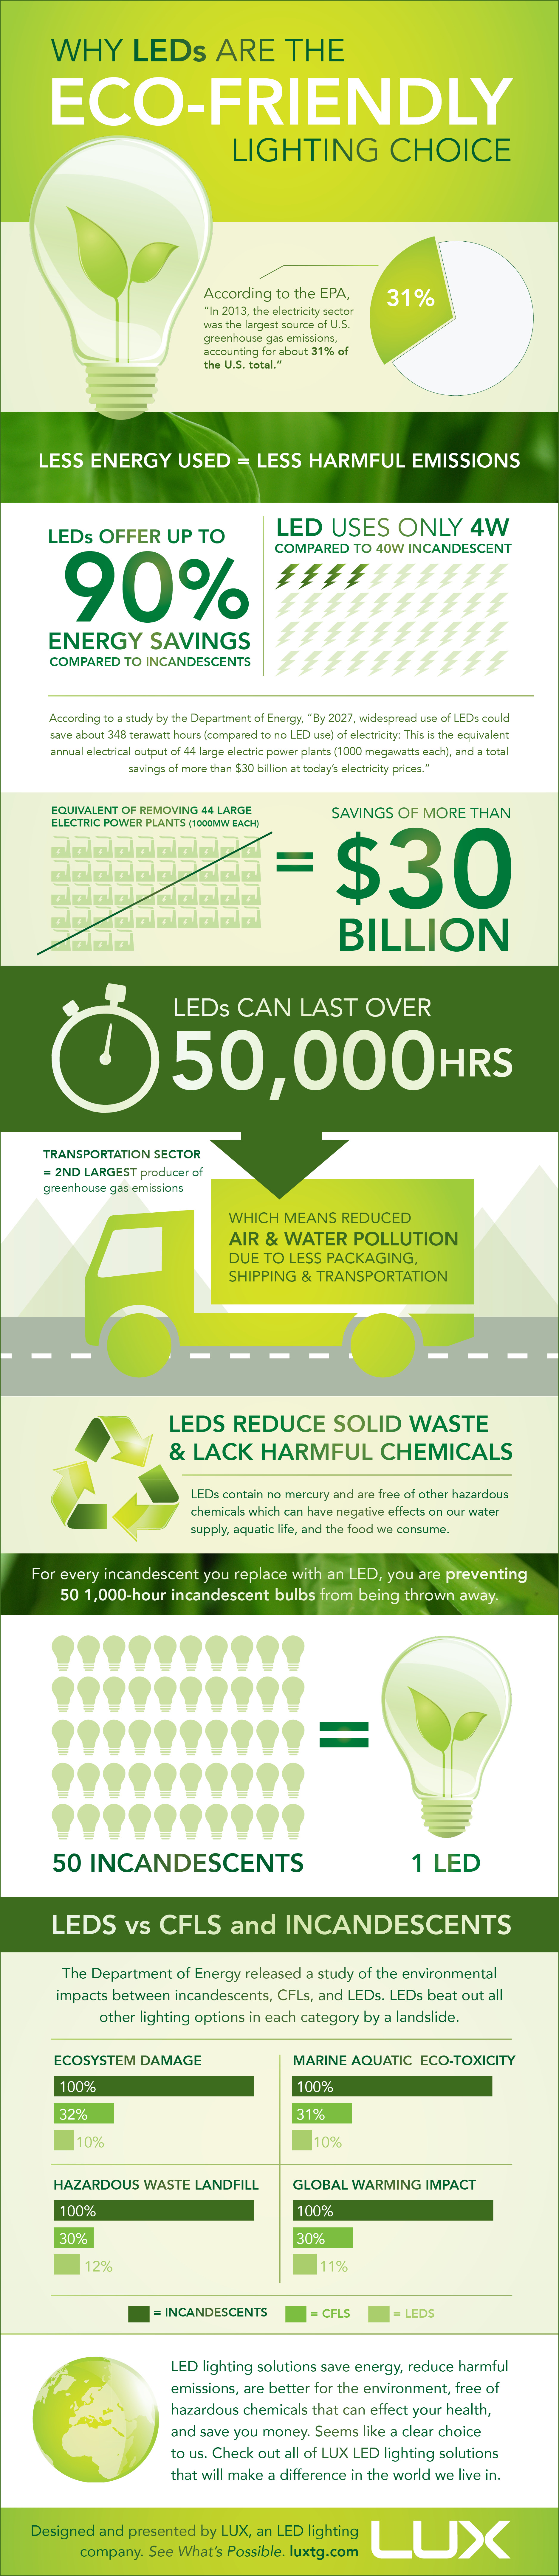 Why LEDs Are the Eco-Friendly Lighting Choice by Lux